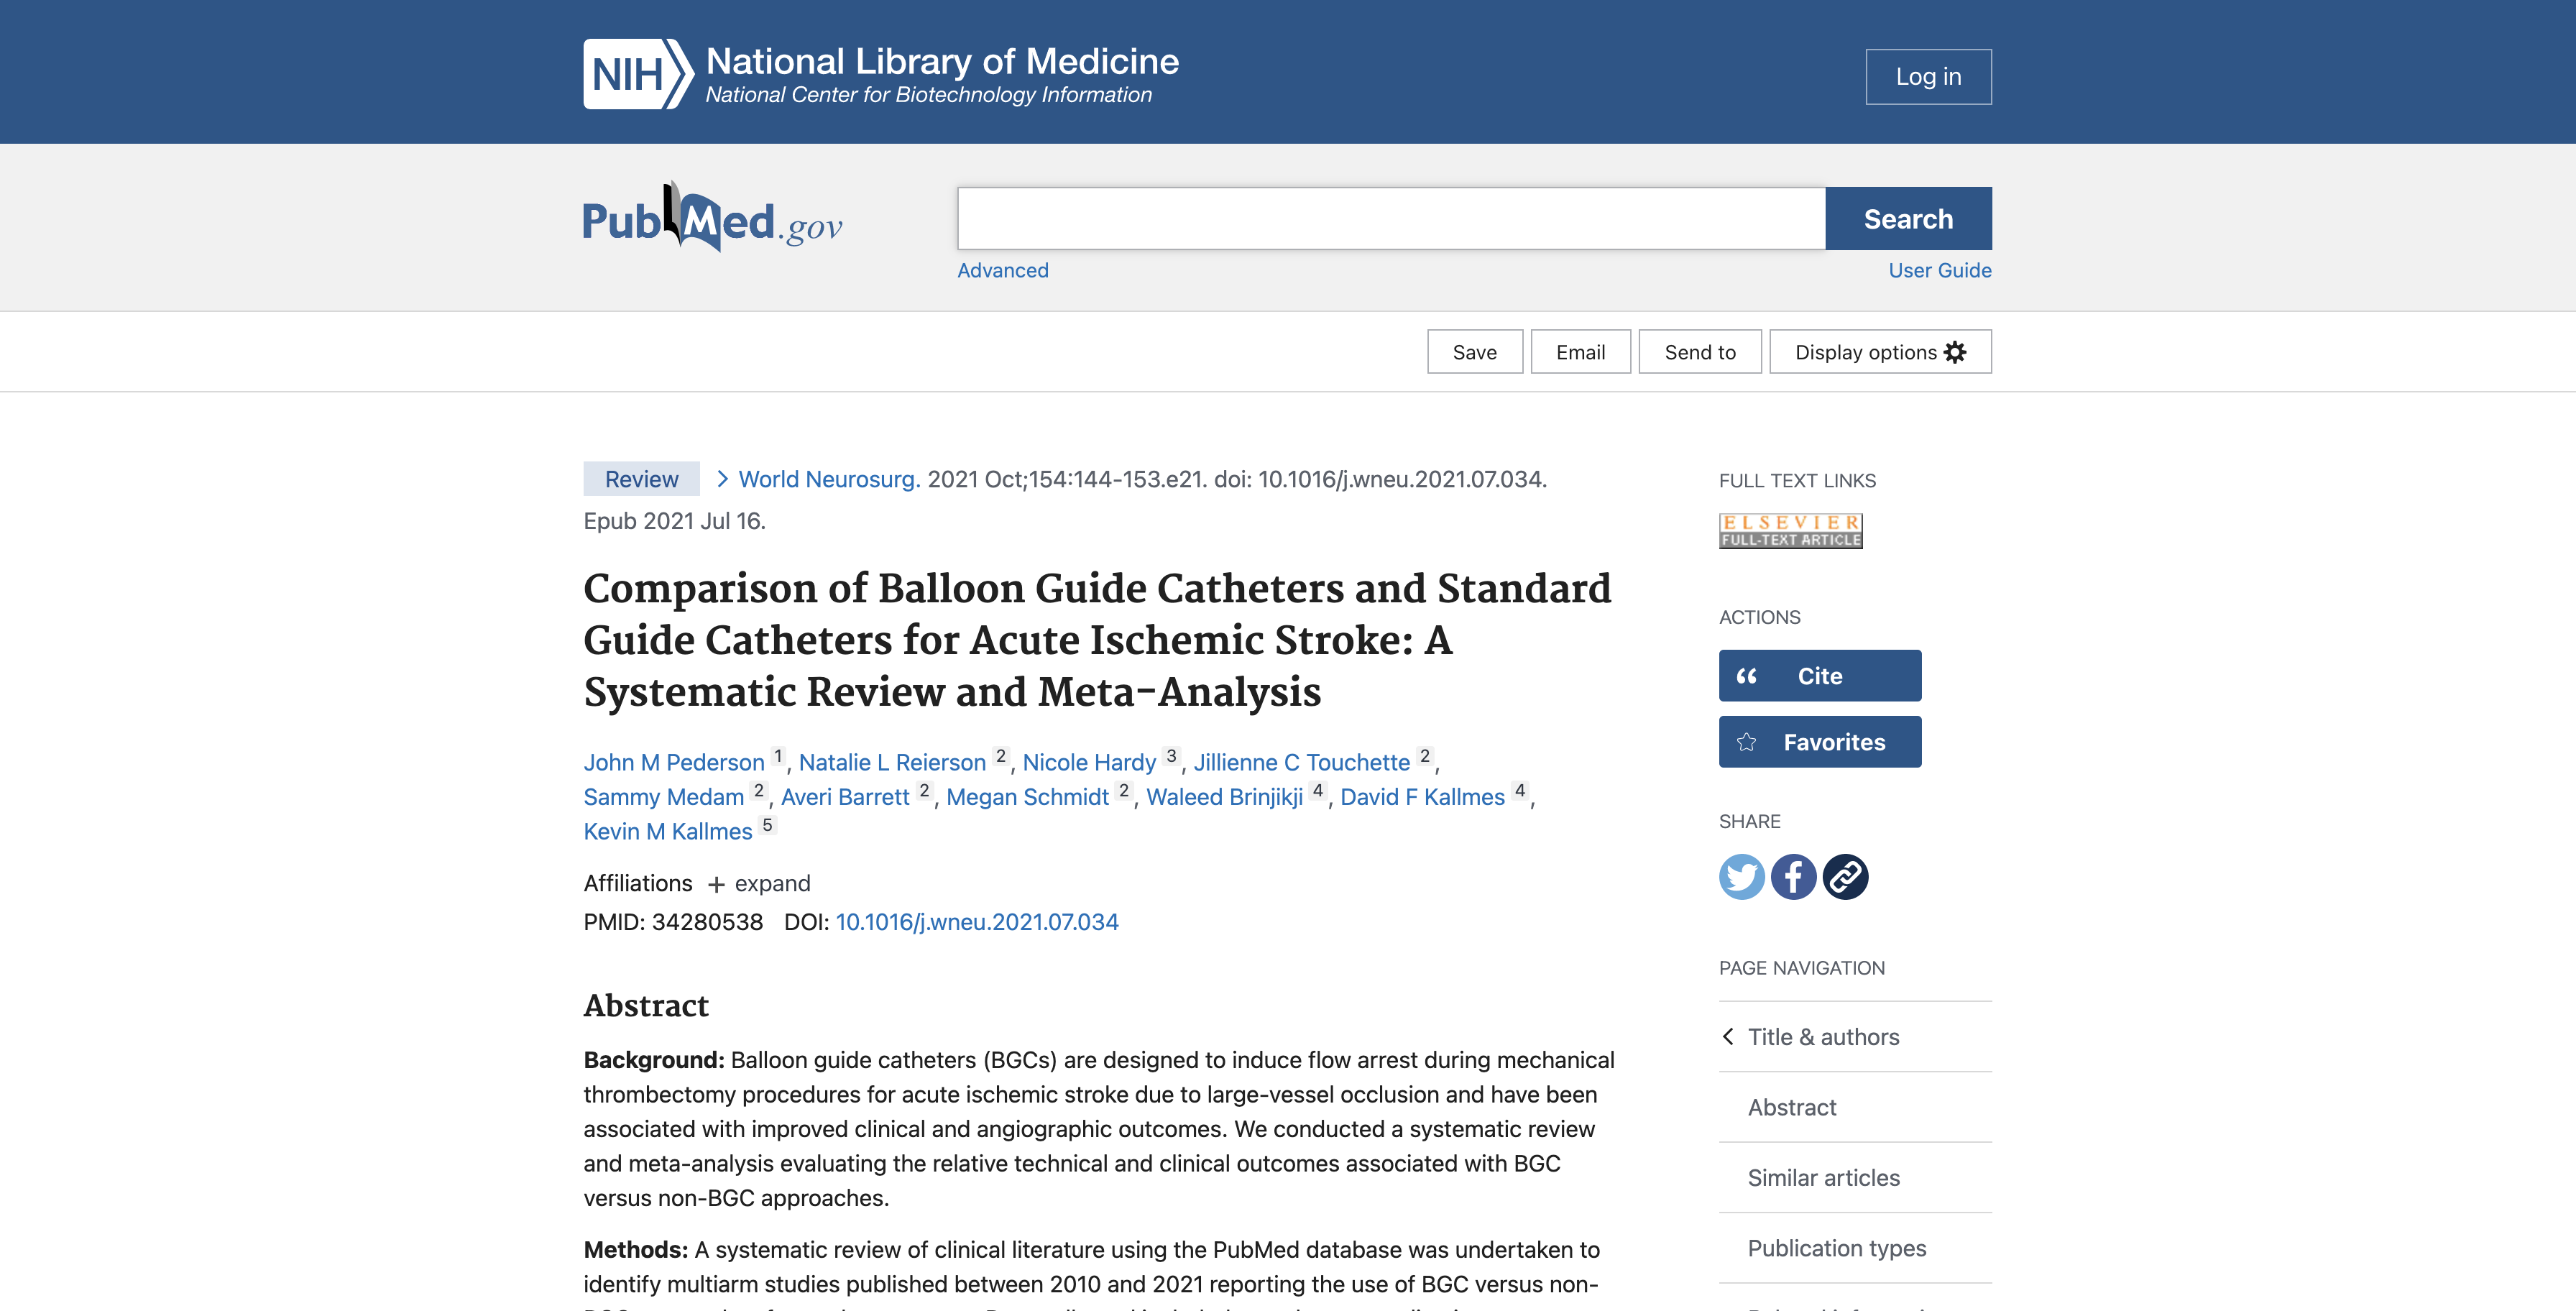 Comparison of Balloon Guide Catheters and Standard Guide Catheters for Acute Ischemic Stroke: A Systematic Review and Meta-Analysis